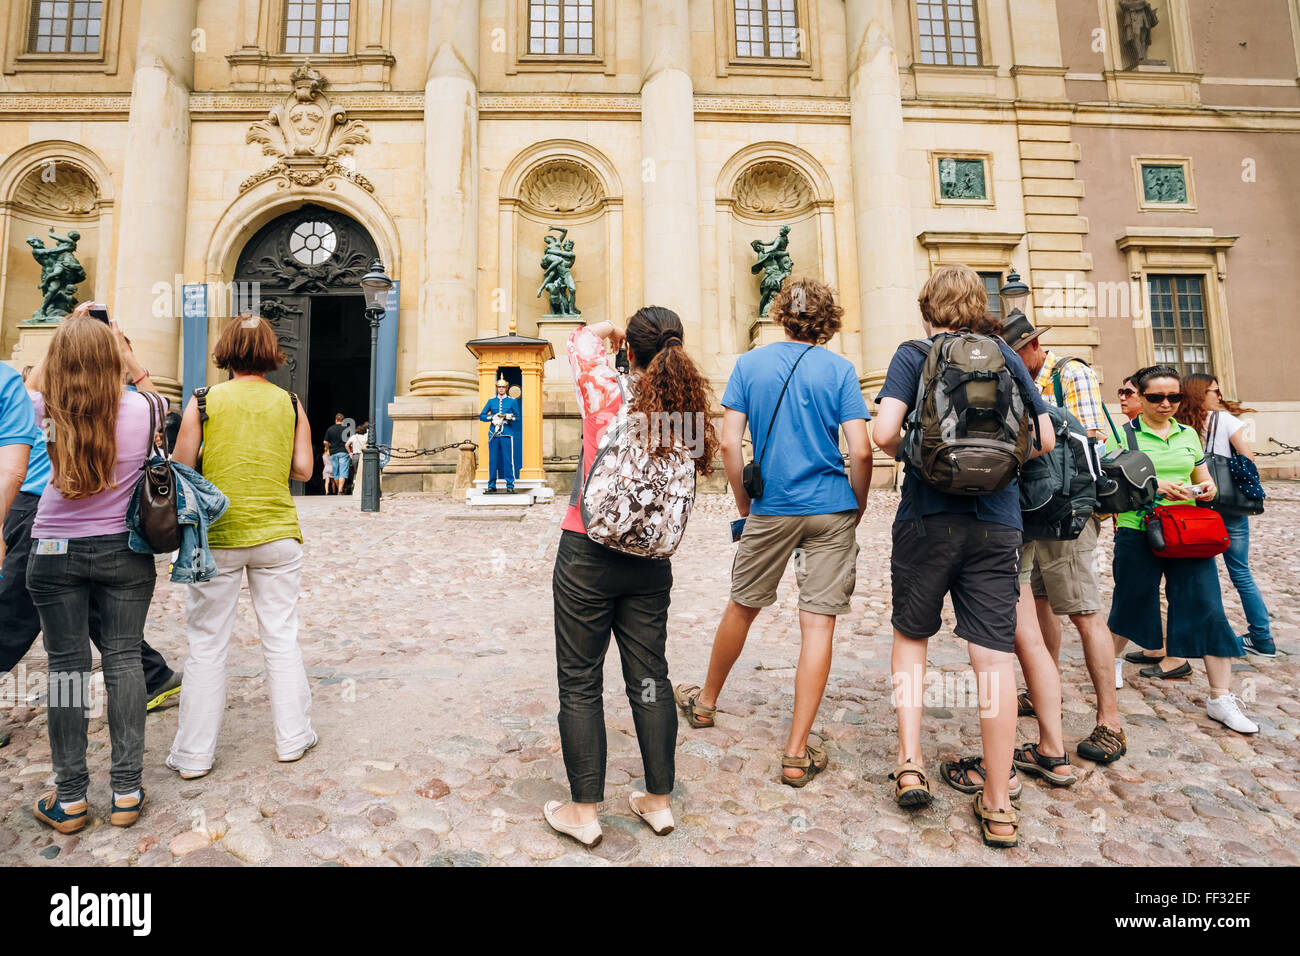 STOCKHOLM, SWEDEN - JULY 30, 2014: Tourists visit and photograph the guard of honor at the Royal palace in Gamla Stan, where kin Stock Photo